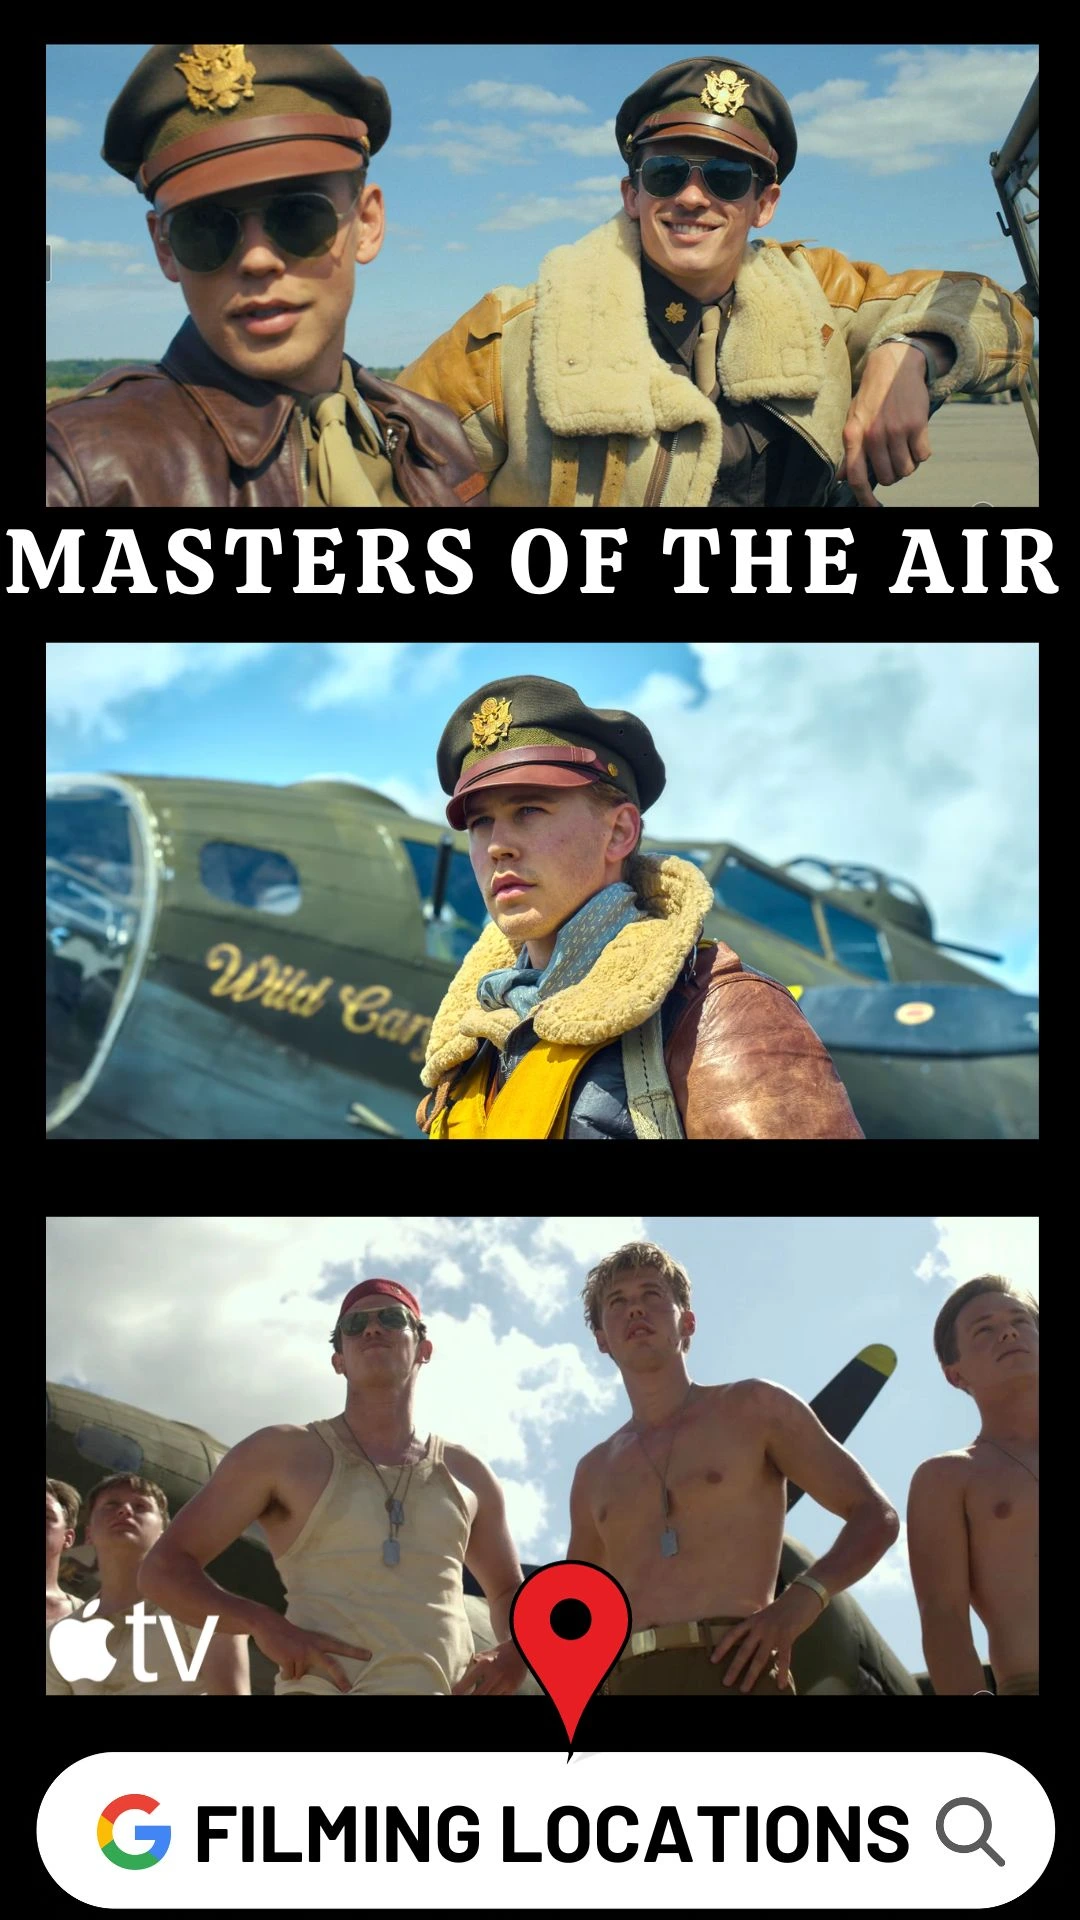 Masters of the Air Filming Locations